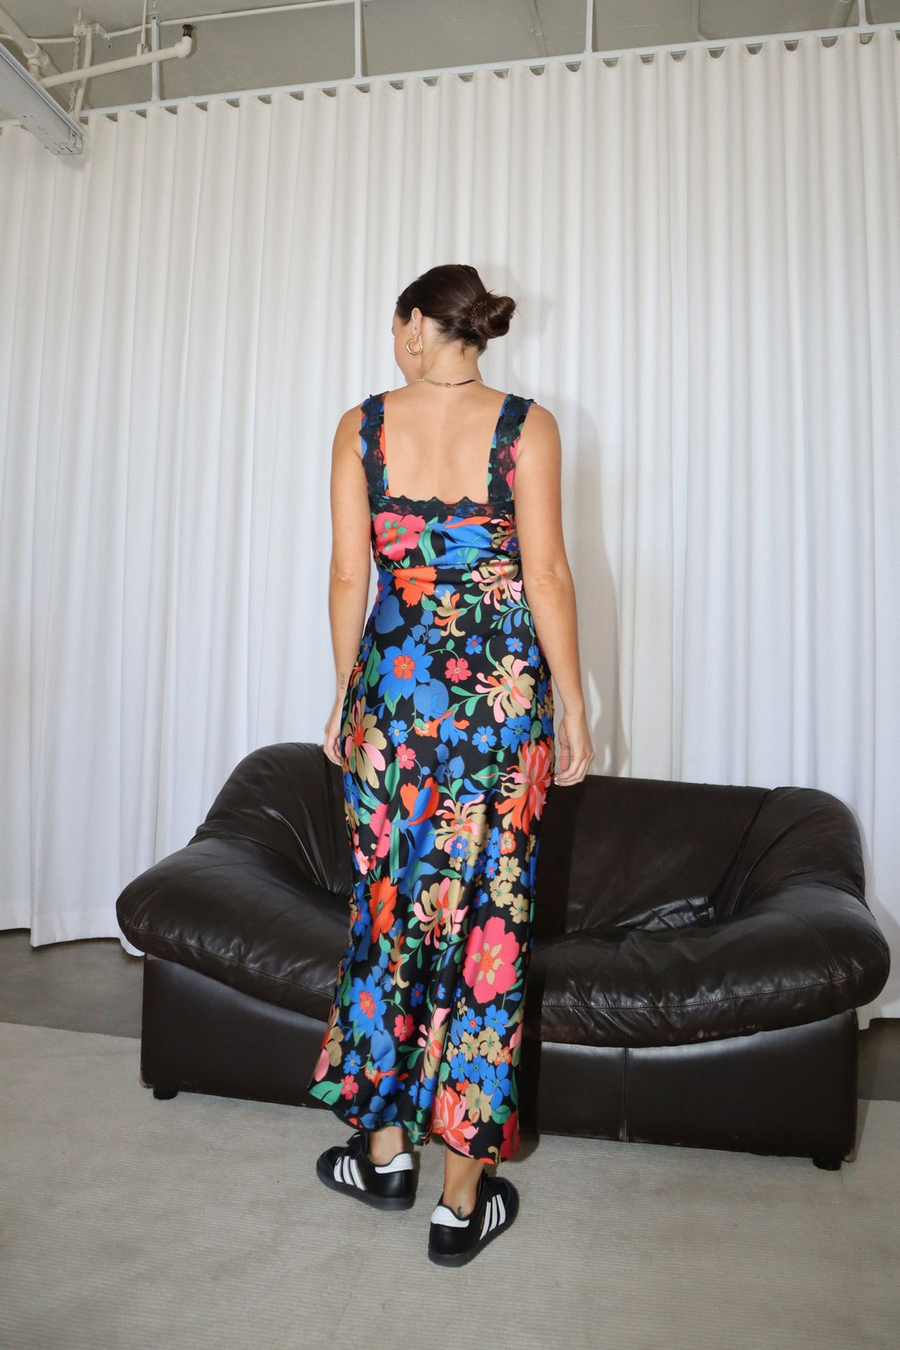 Maxi dress with lace trim along the shoulder straps and a plunge neckline.